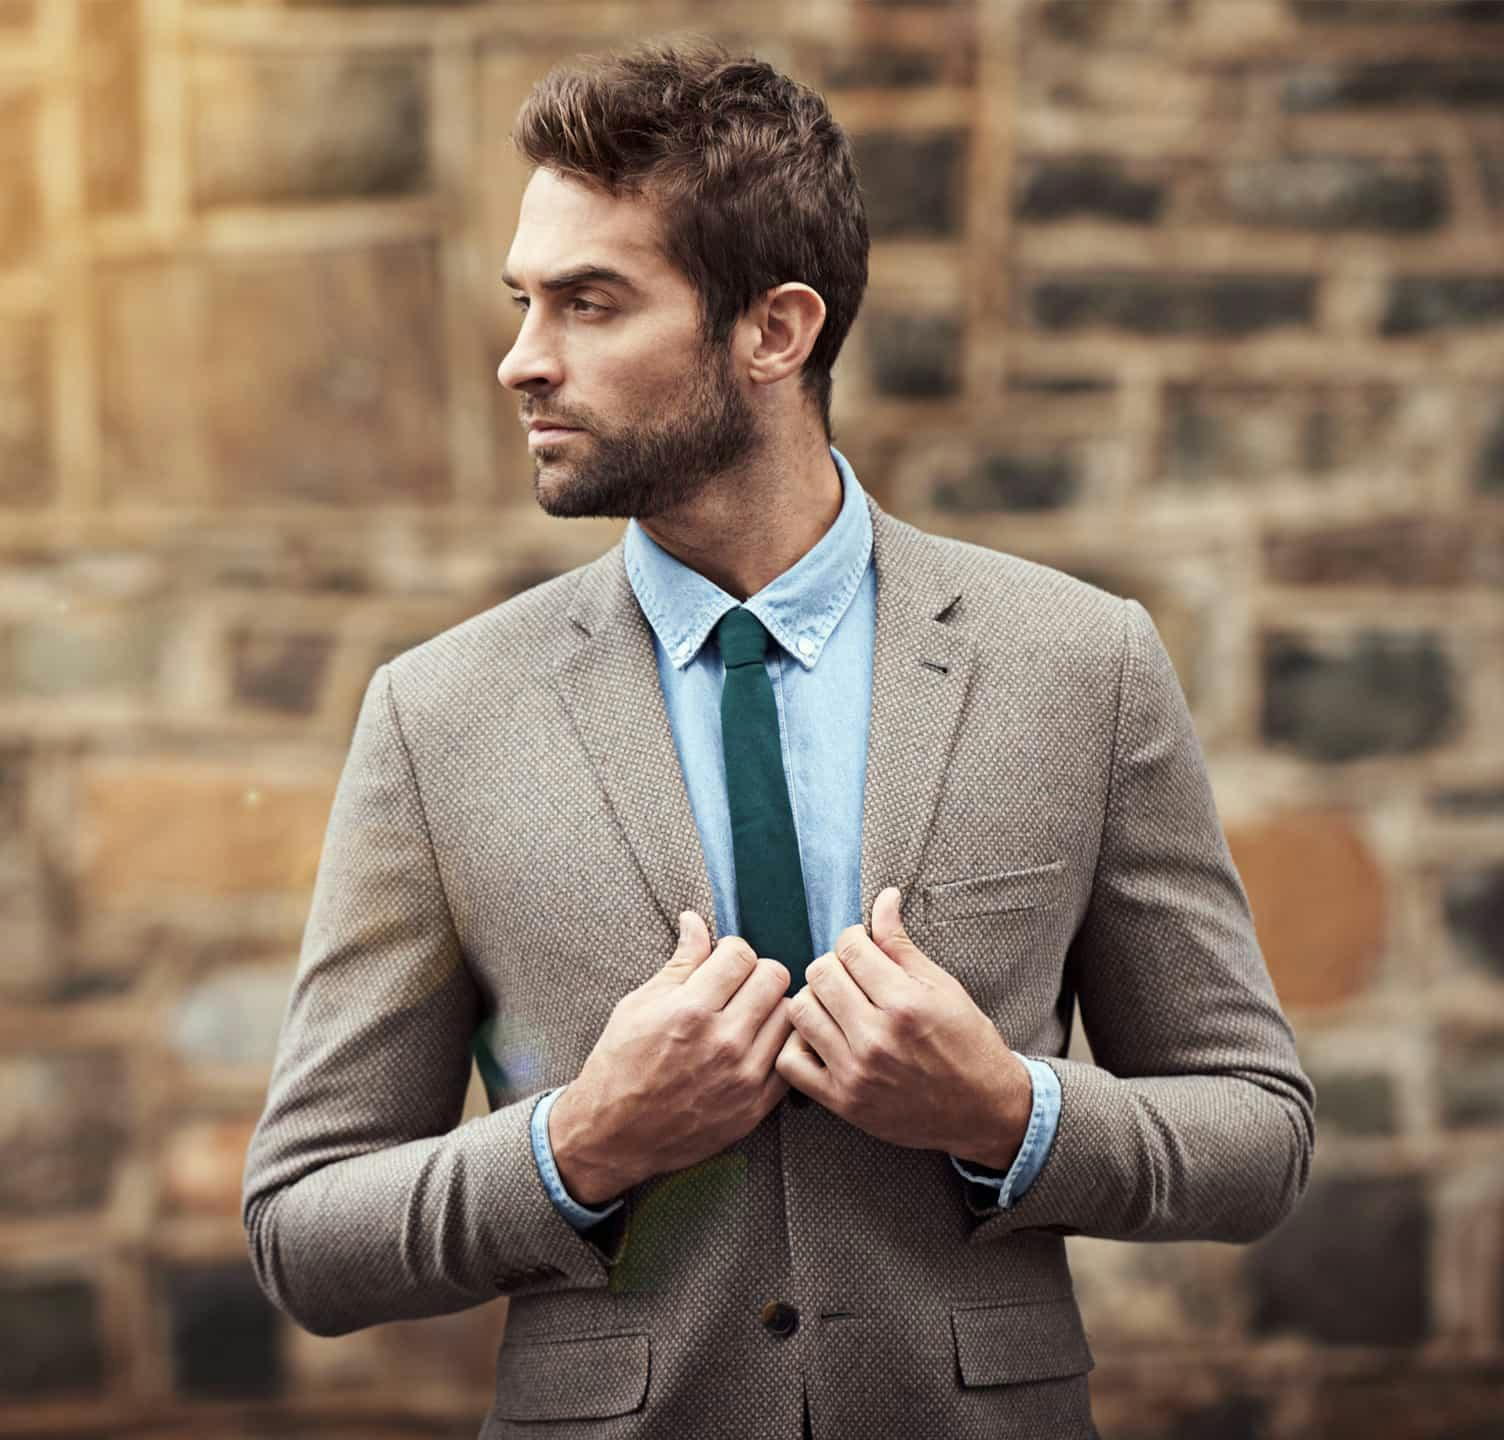 Man wearing a suit looking to the side